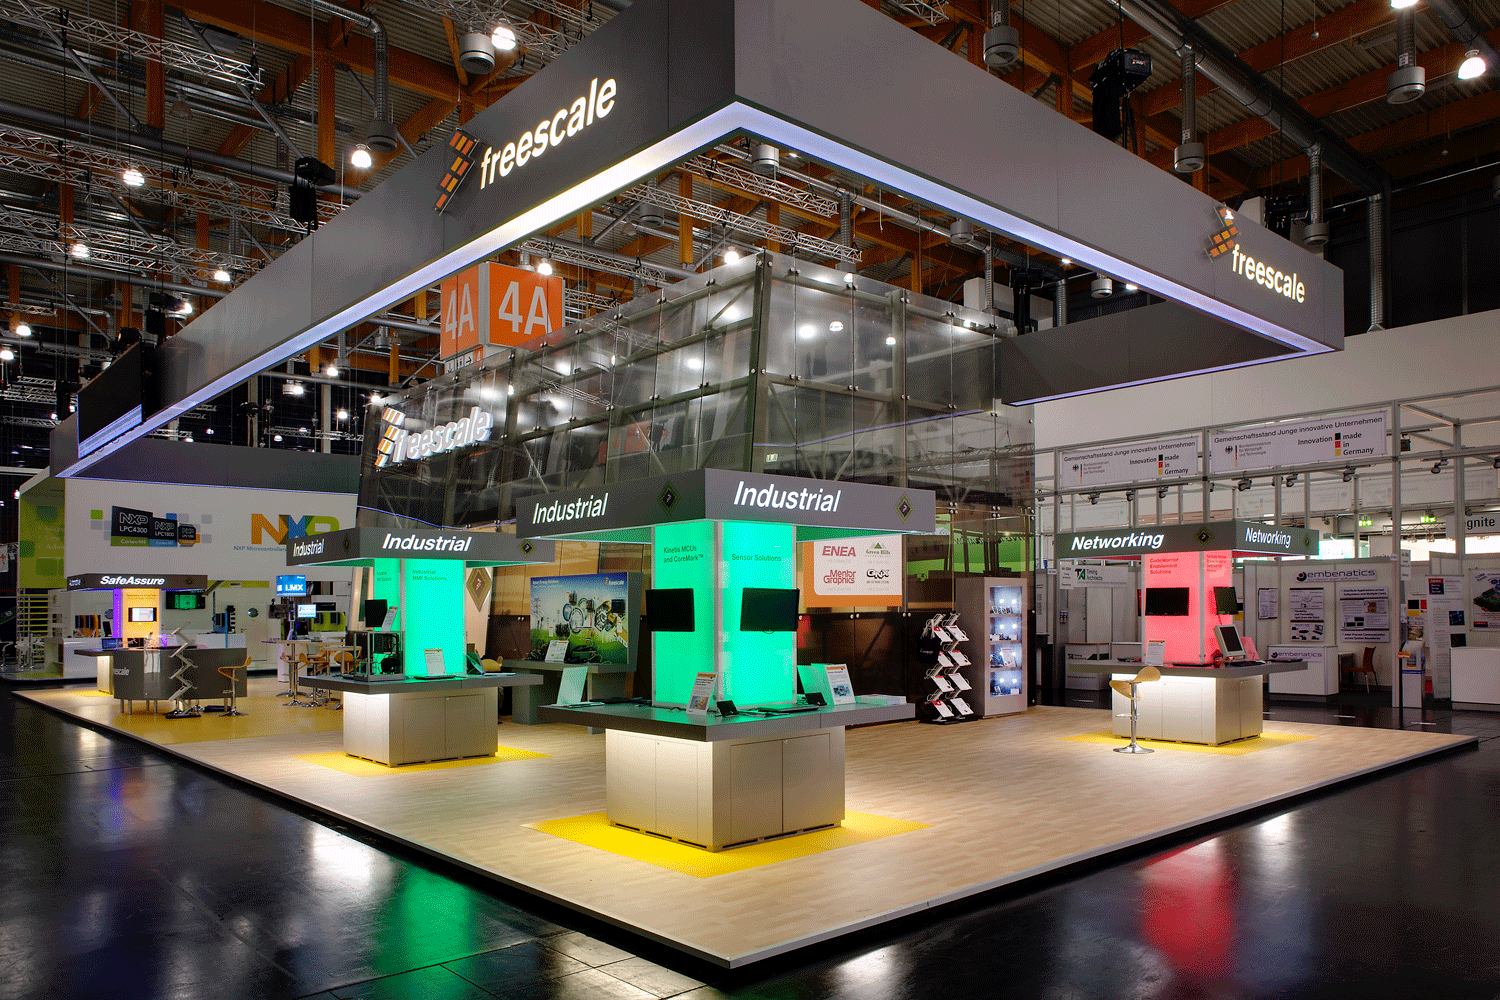 Freescale stand, Nürnberg, Germany